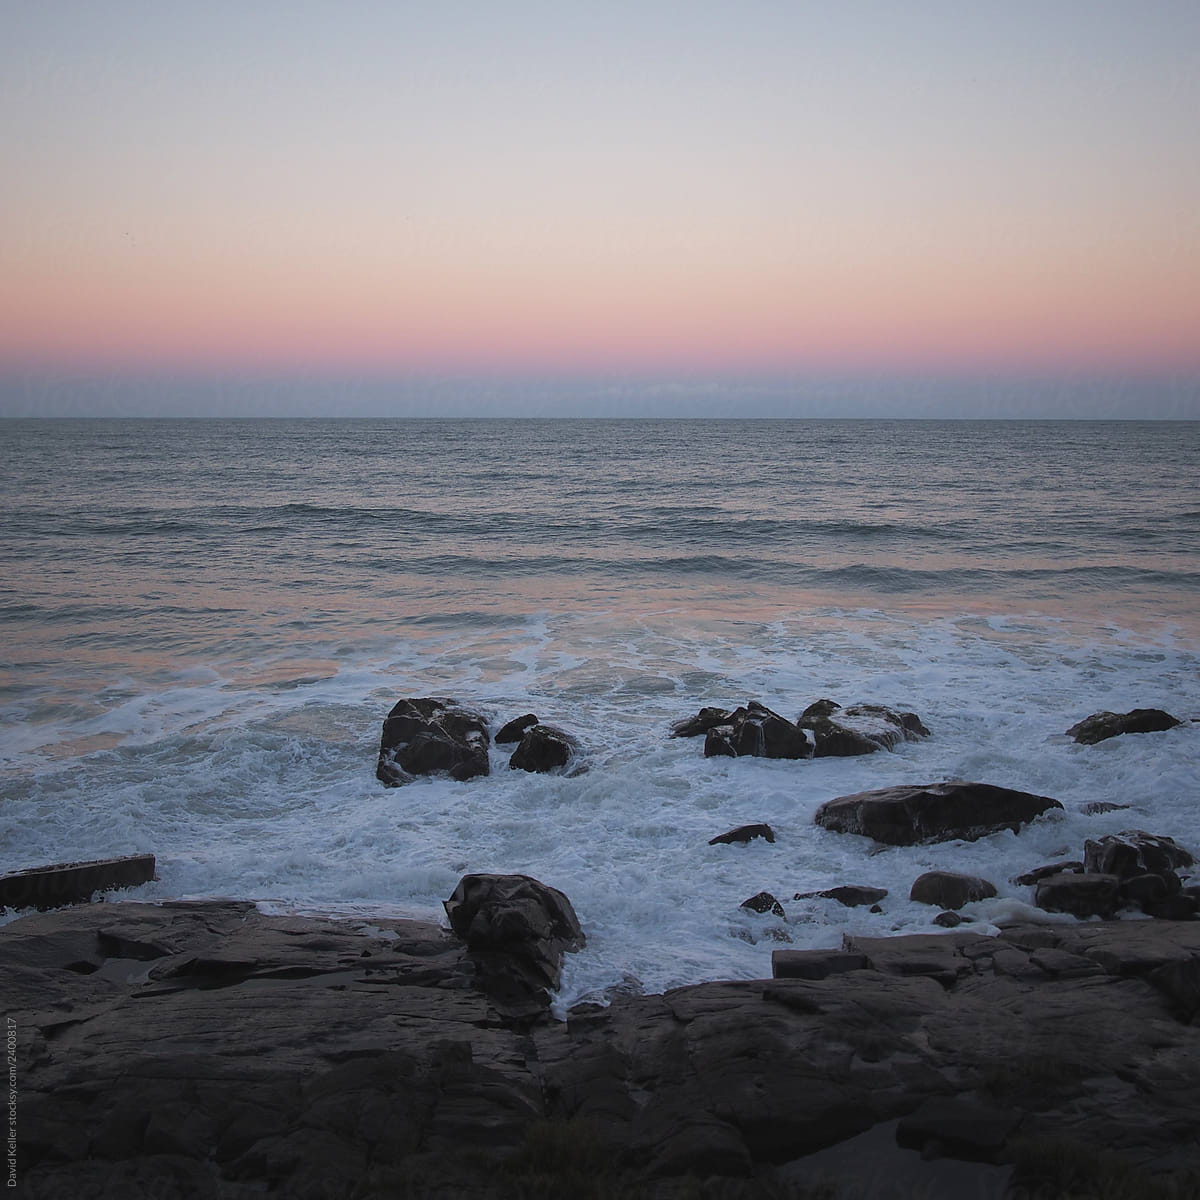 An purple sunset meets the water on a rocky coastline